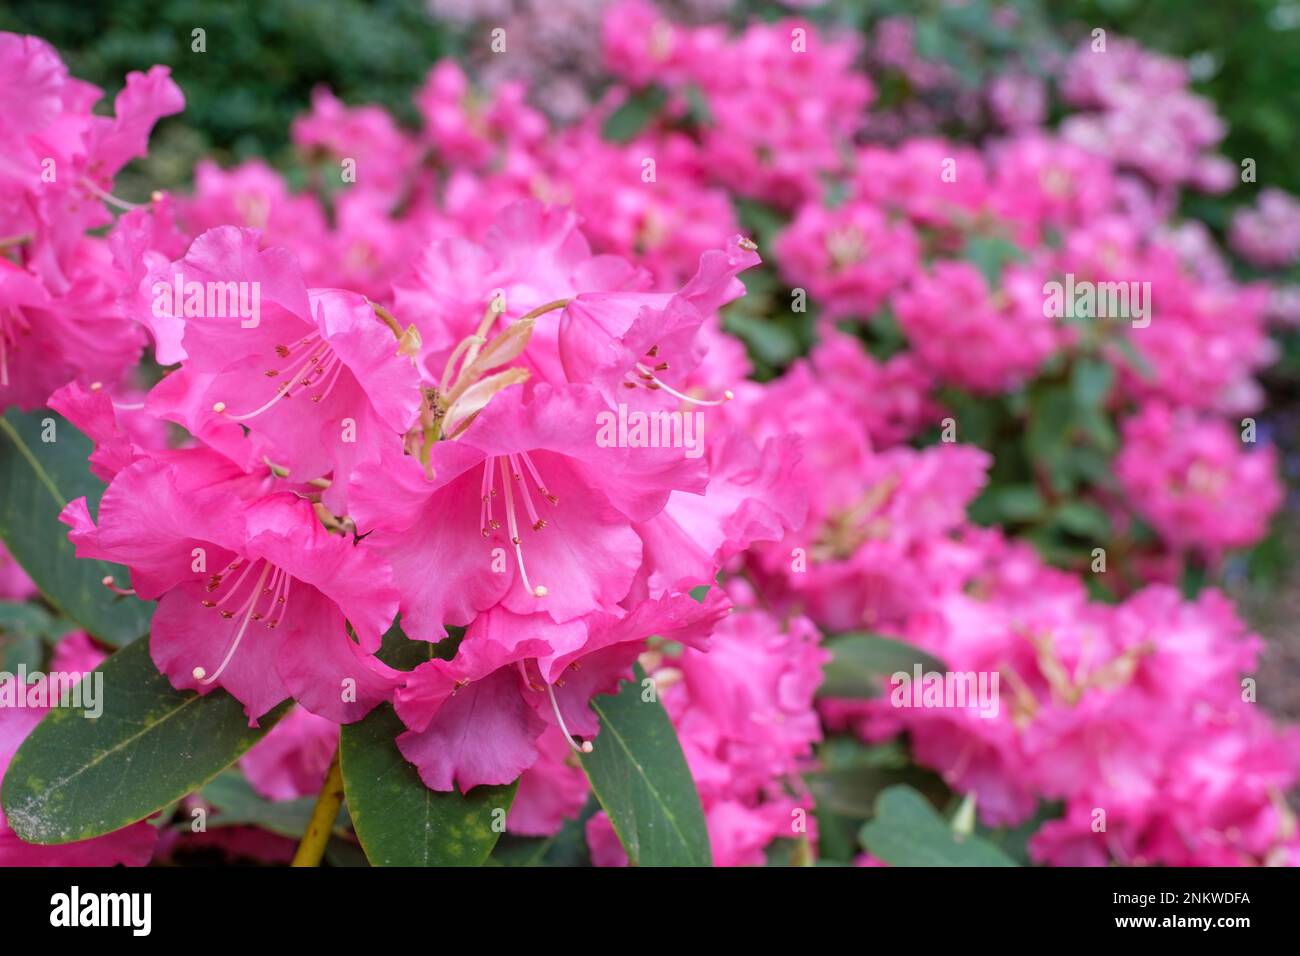 Rhododendron Linda, evergreen shrub, bell-shaped, rose pink flowers with frilly edges Stock Photo